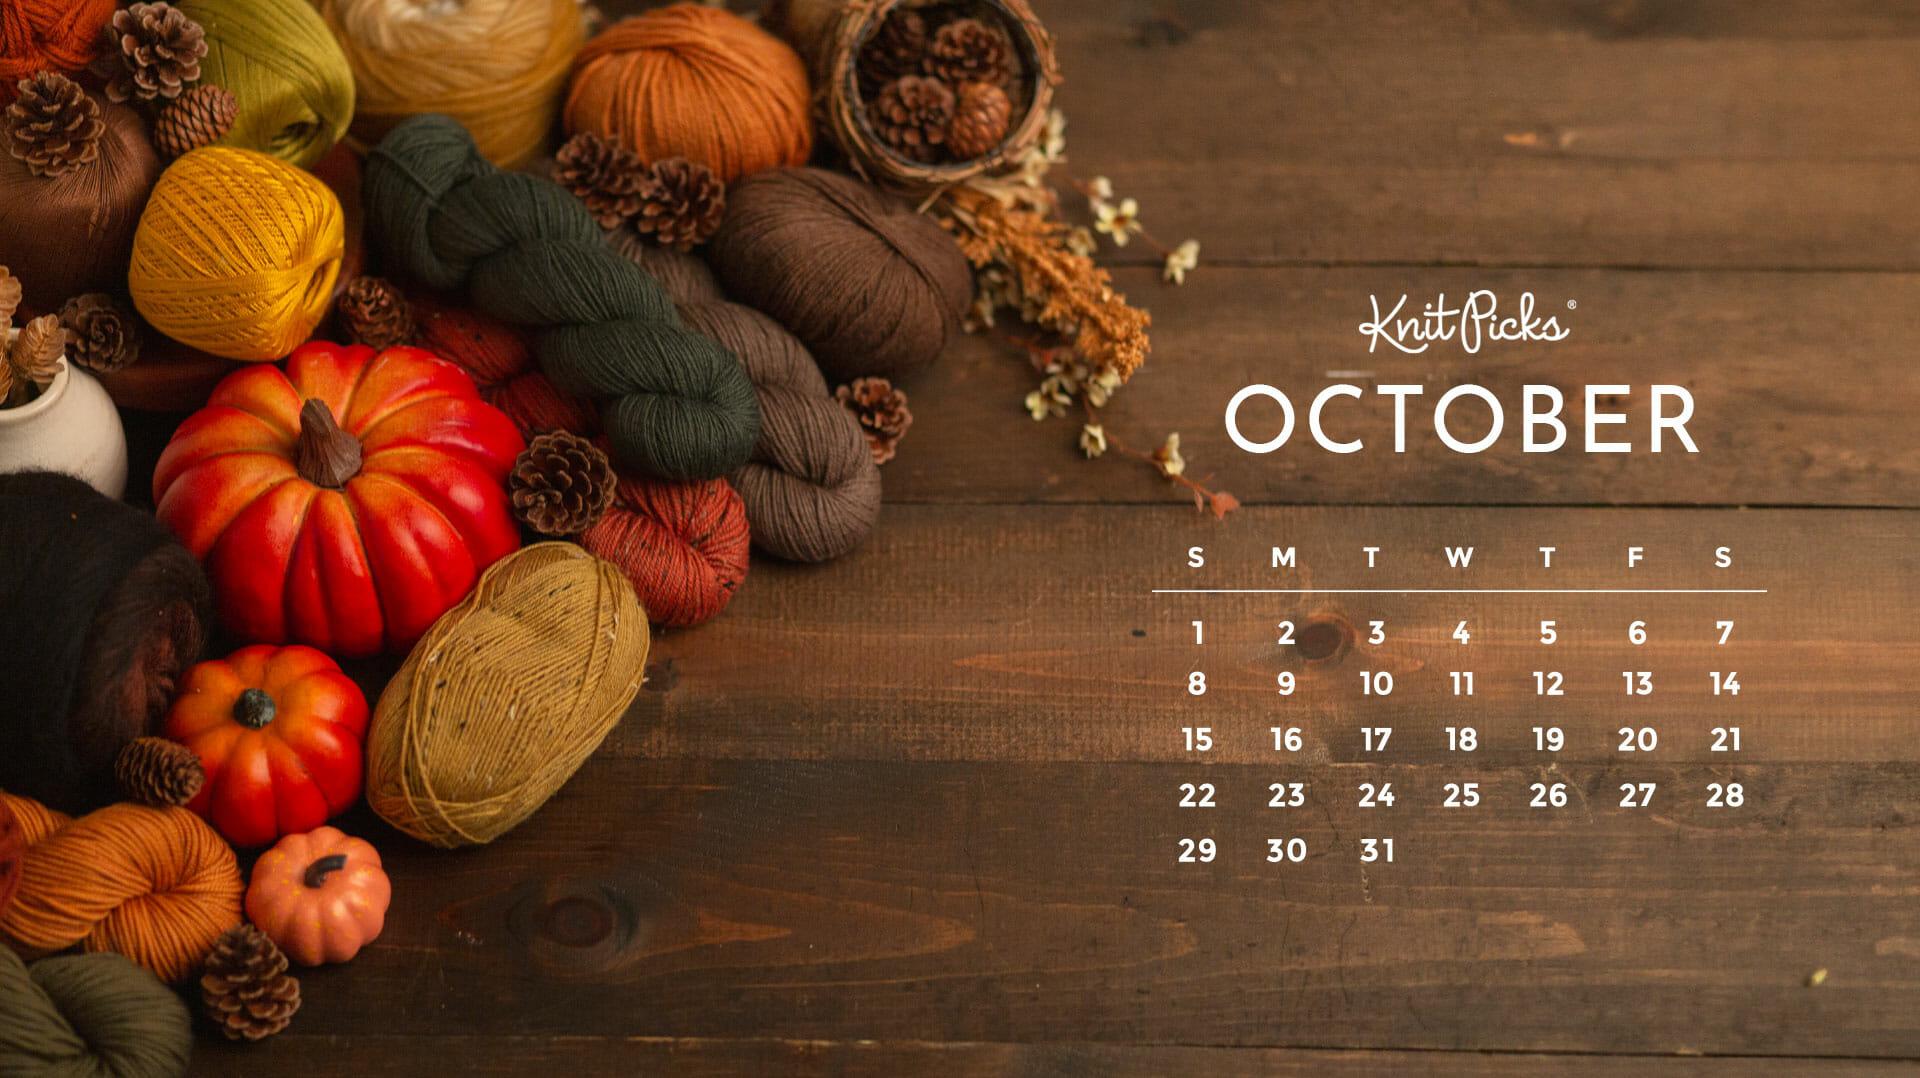 Able October Calendar The Knit Picks Staff